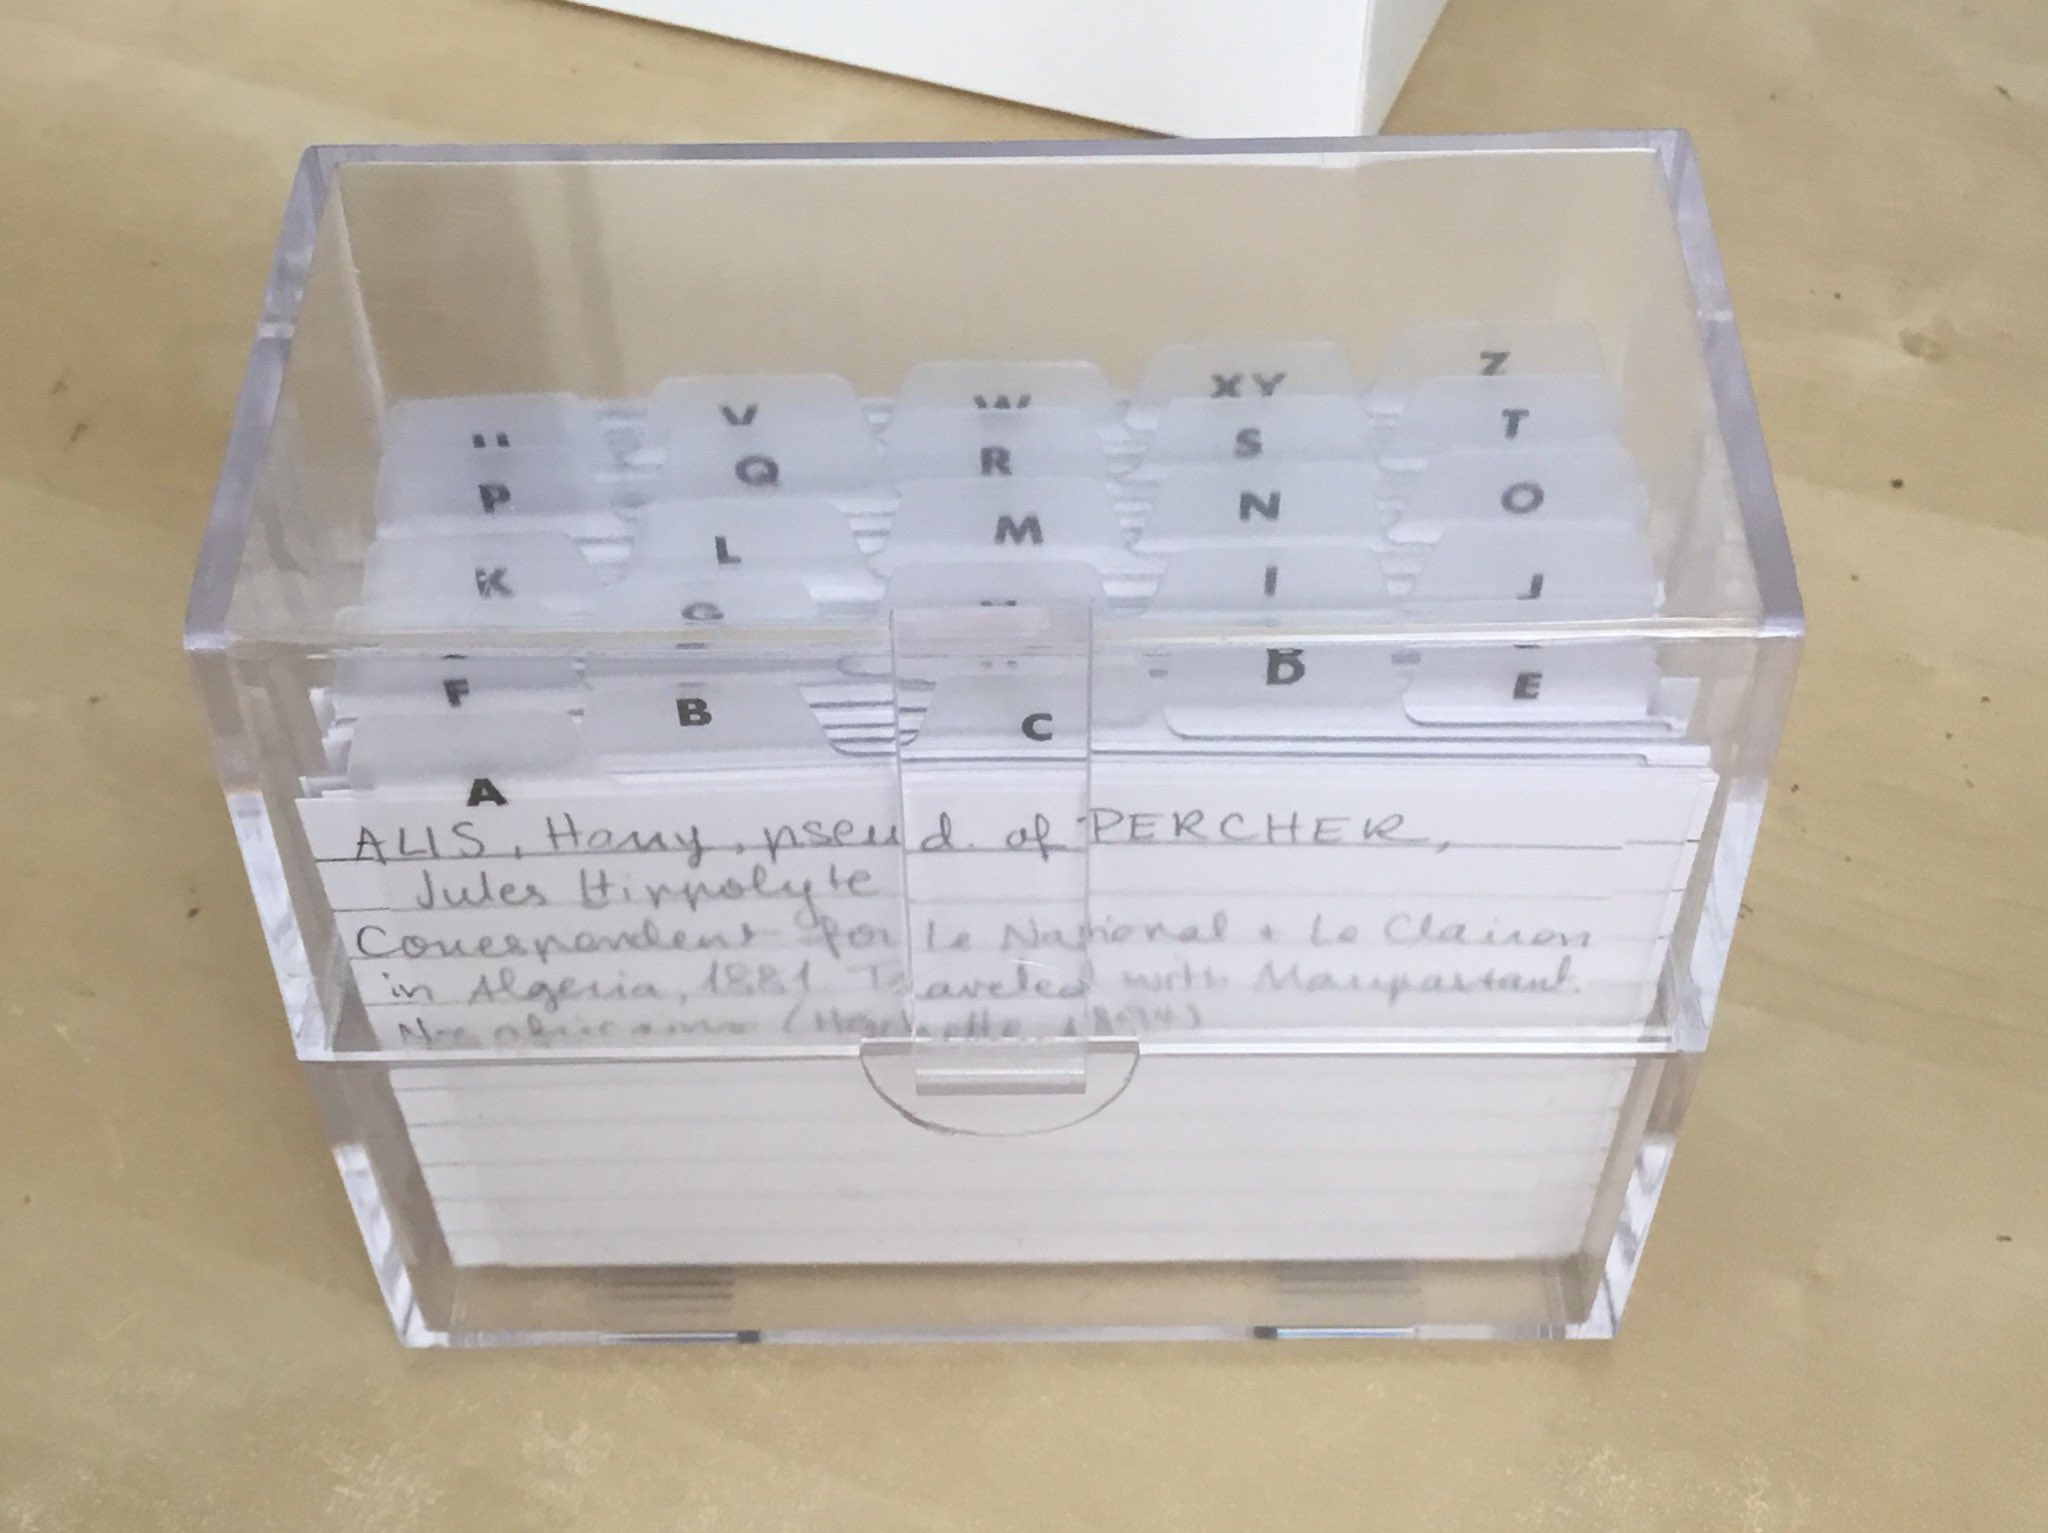 Theseus plein Downtown Maureen DeNino on Twitter: "@genieyoo818 Though, honestly, nothing wrong  with flashcards, either! Here's my dinky HEMA card index that I use to keep  track of writers, journalists, and their pseudonyms:  https://t.co/kD30jE8eCn" /